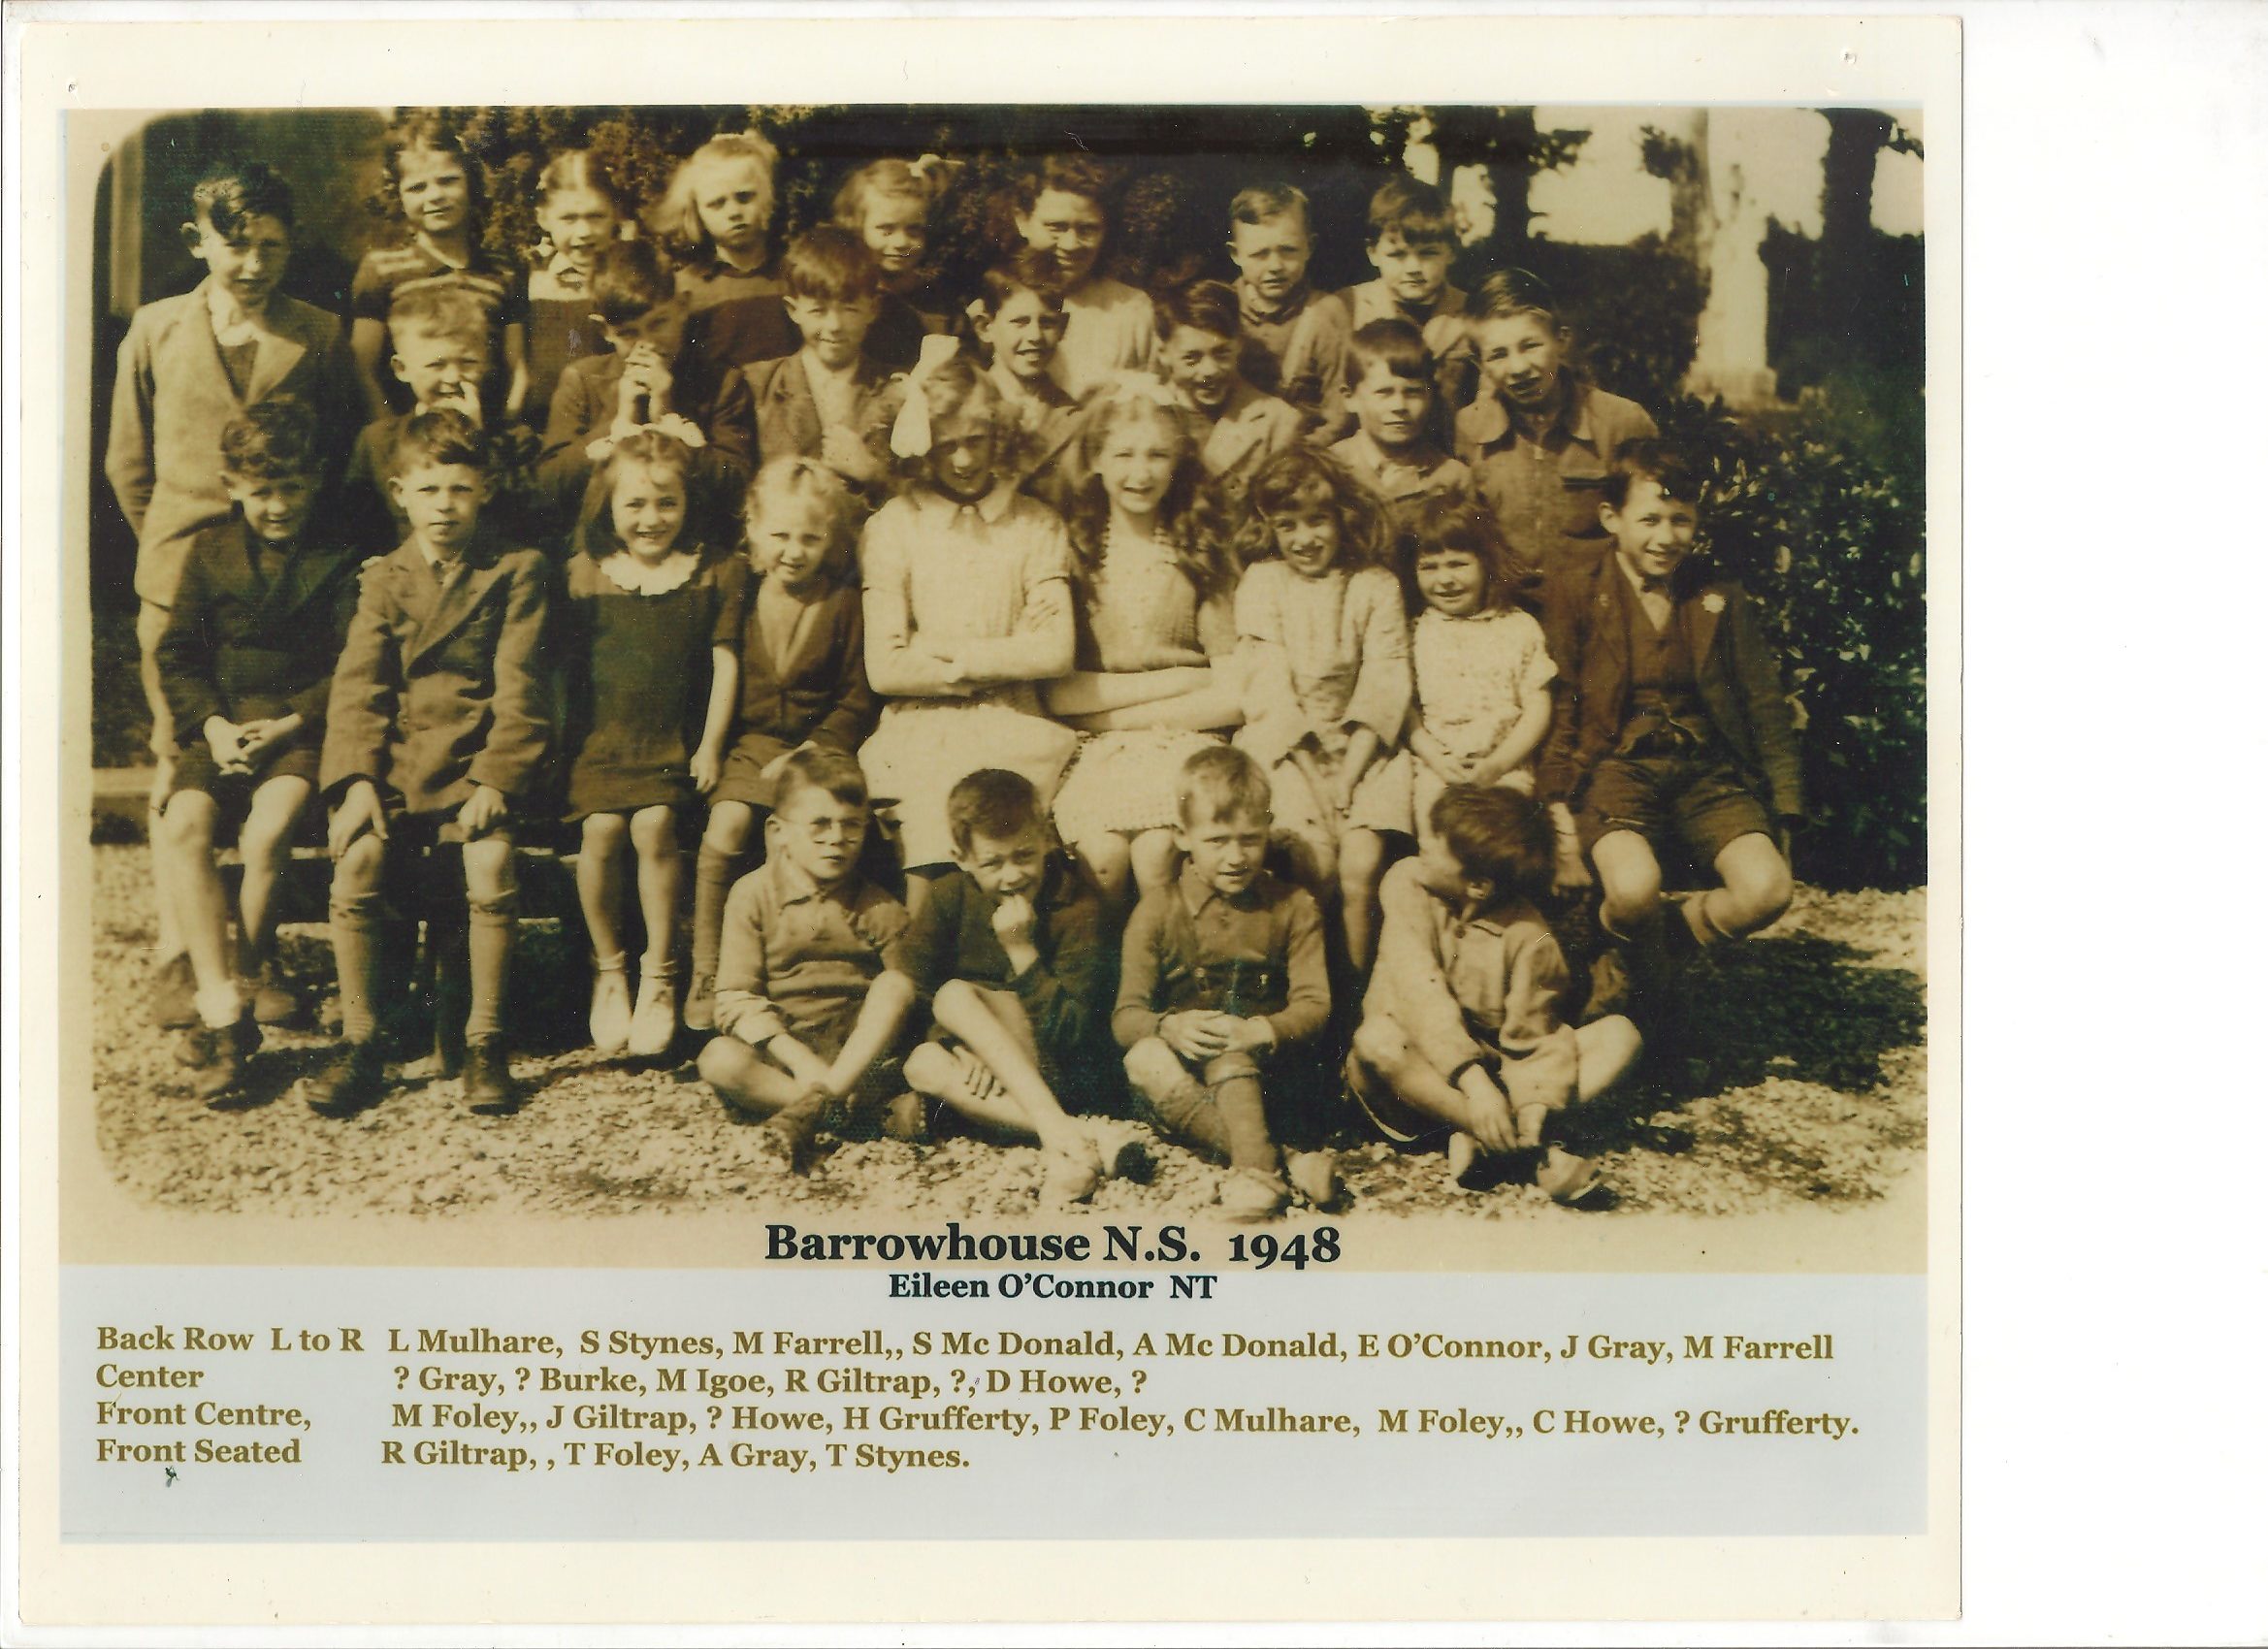 A Historic Laois School Needs Your Help To Find Photos For Reunion Book Laois Today